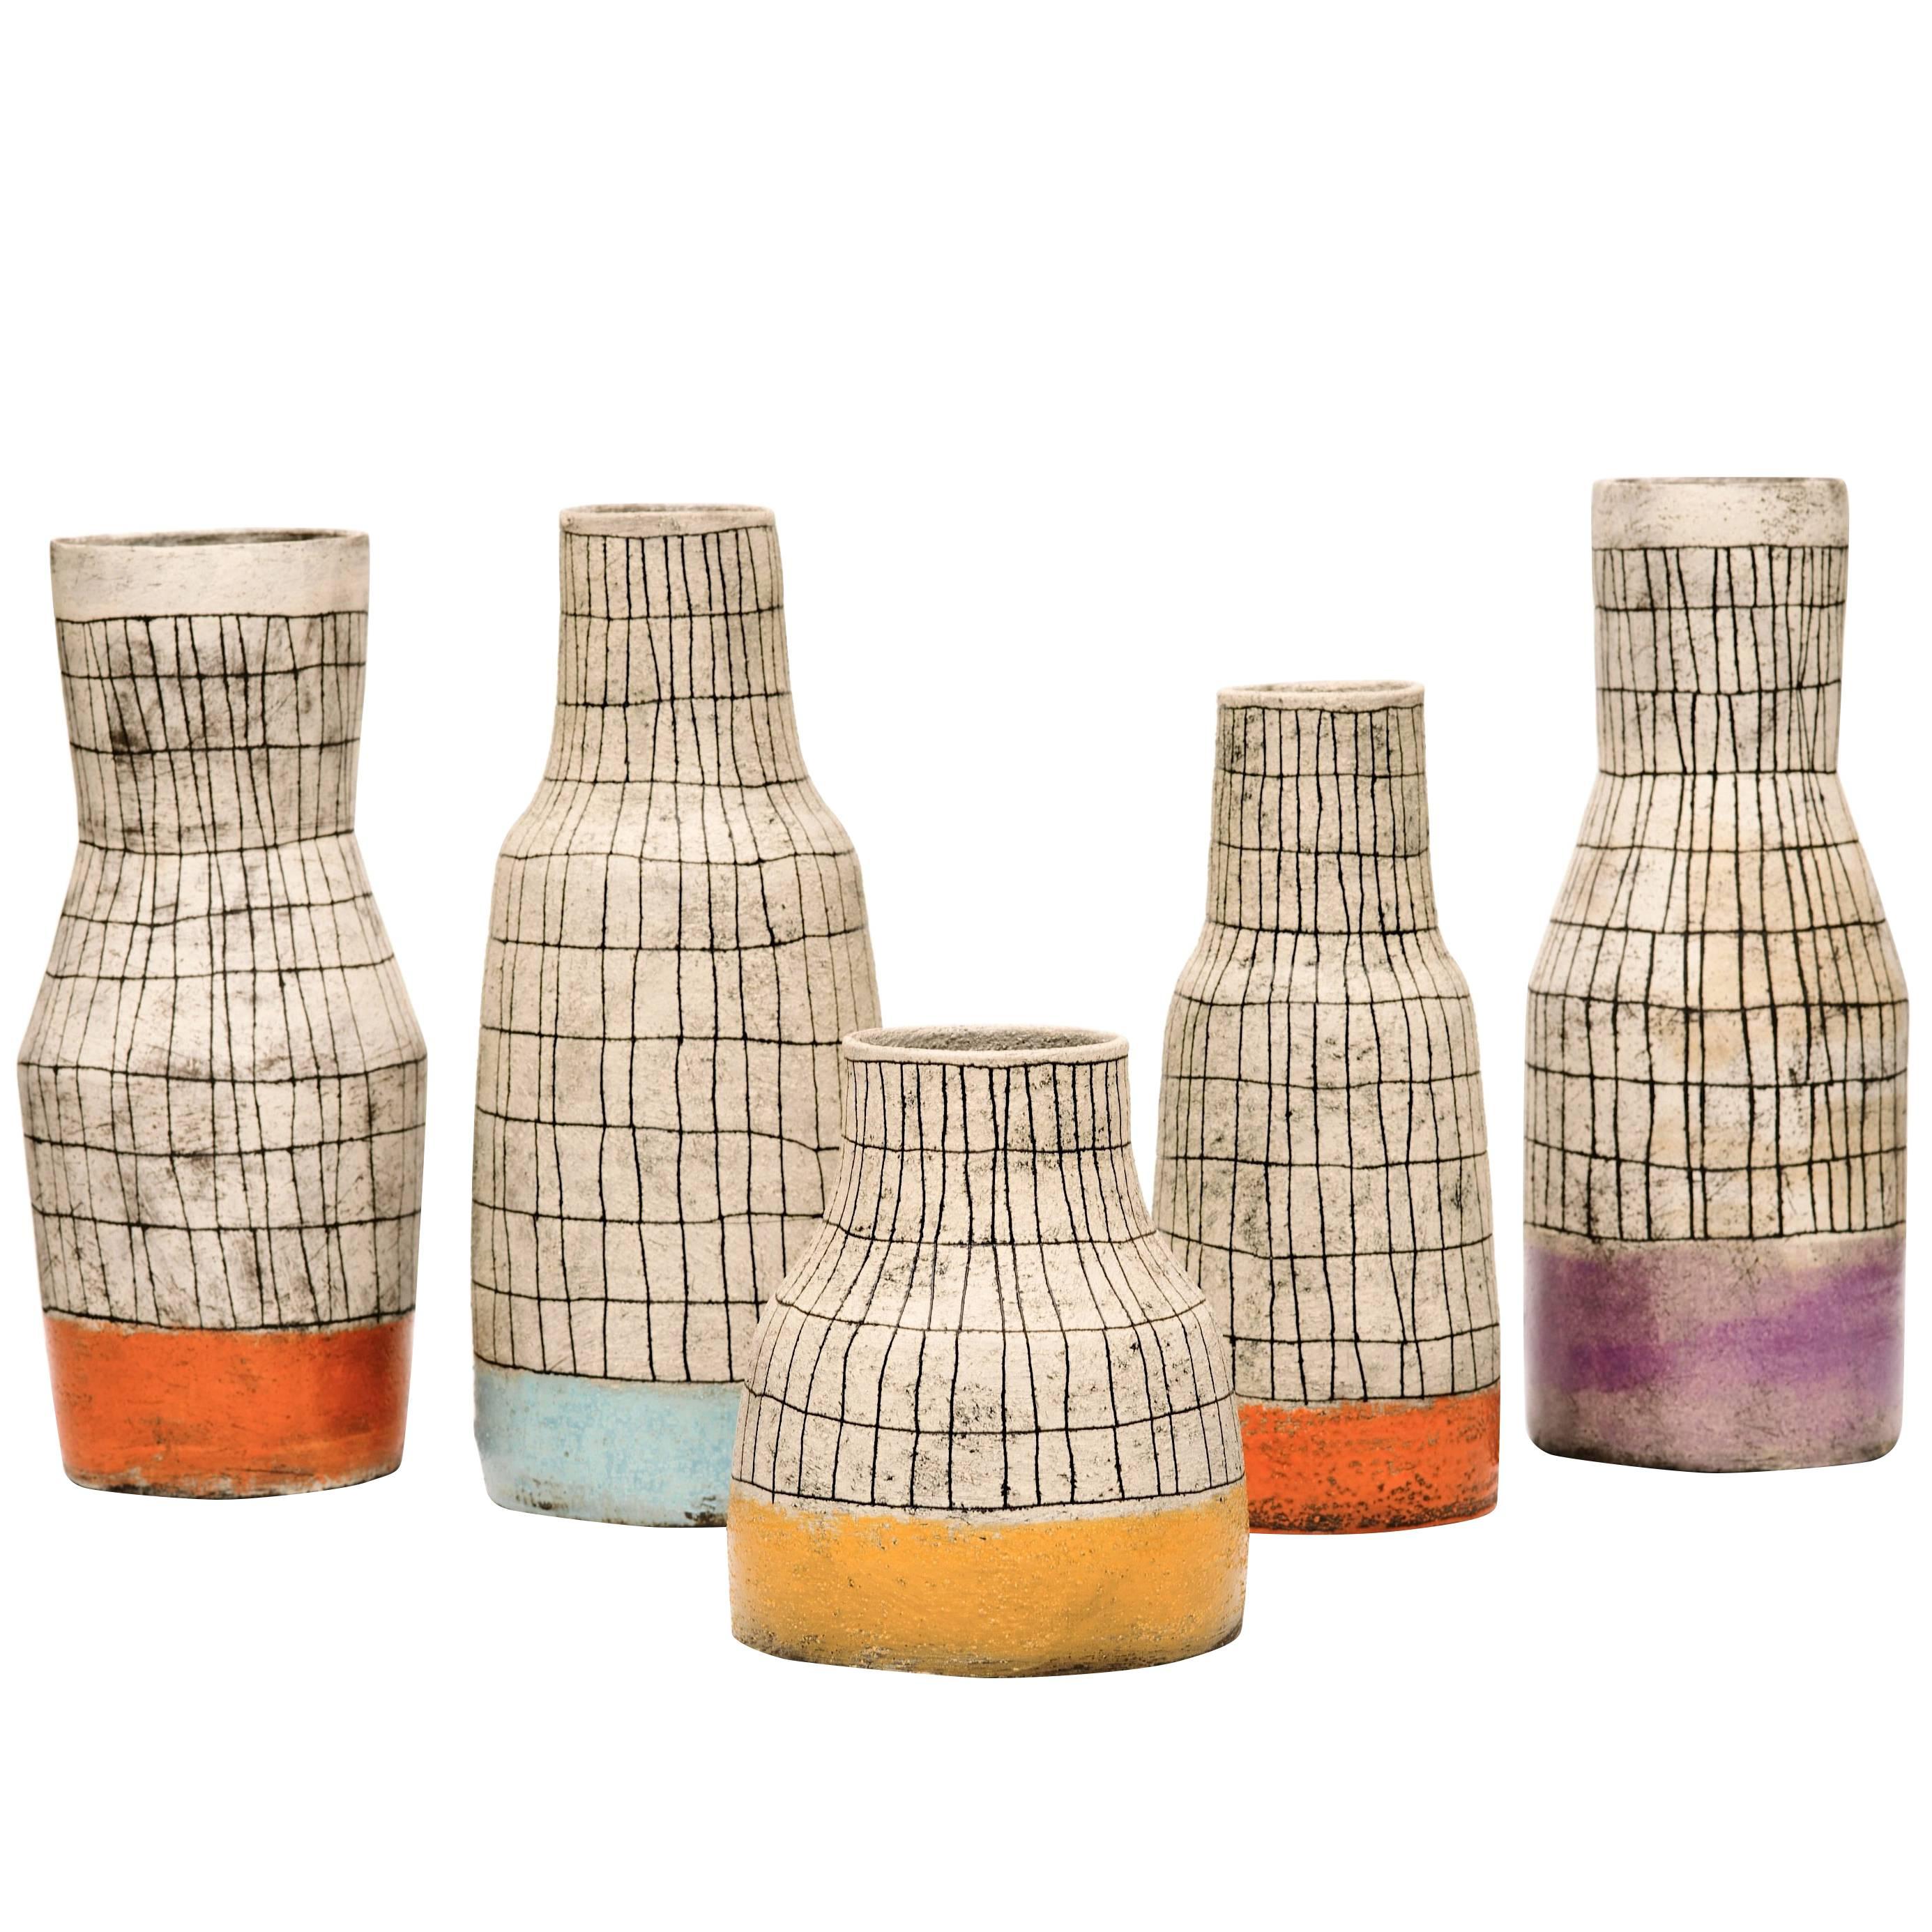 Contemporary Hand-Painted Ceramic Vases with a Mid Century Design